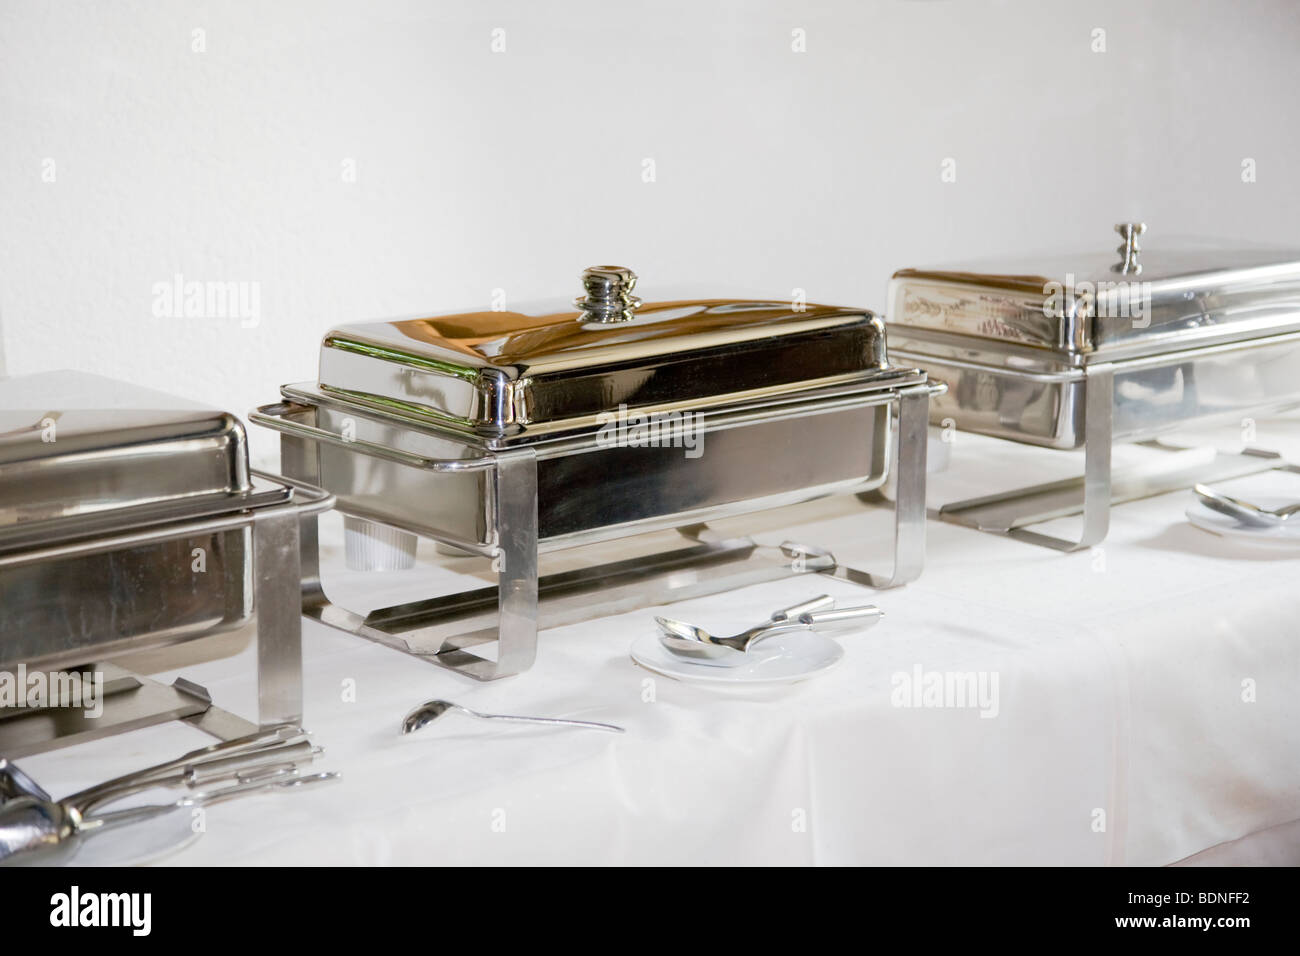 Chafing Dish made of stainless steel at buffet Stock Photo